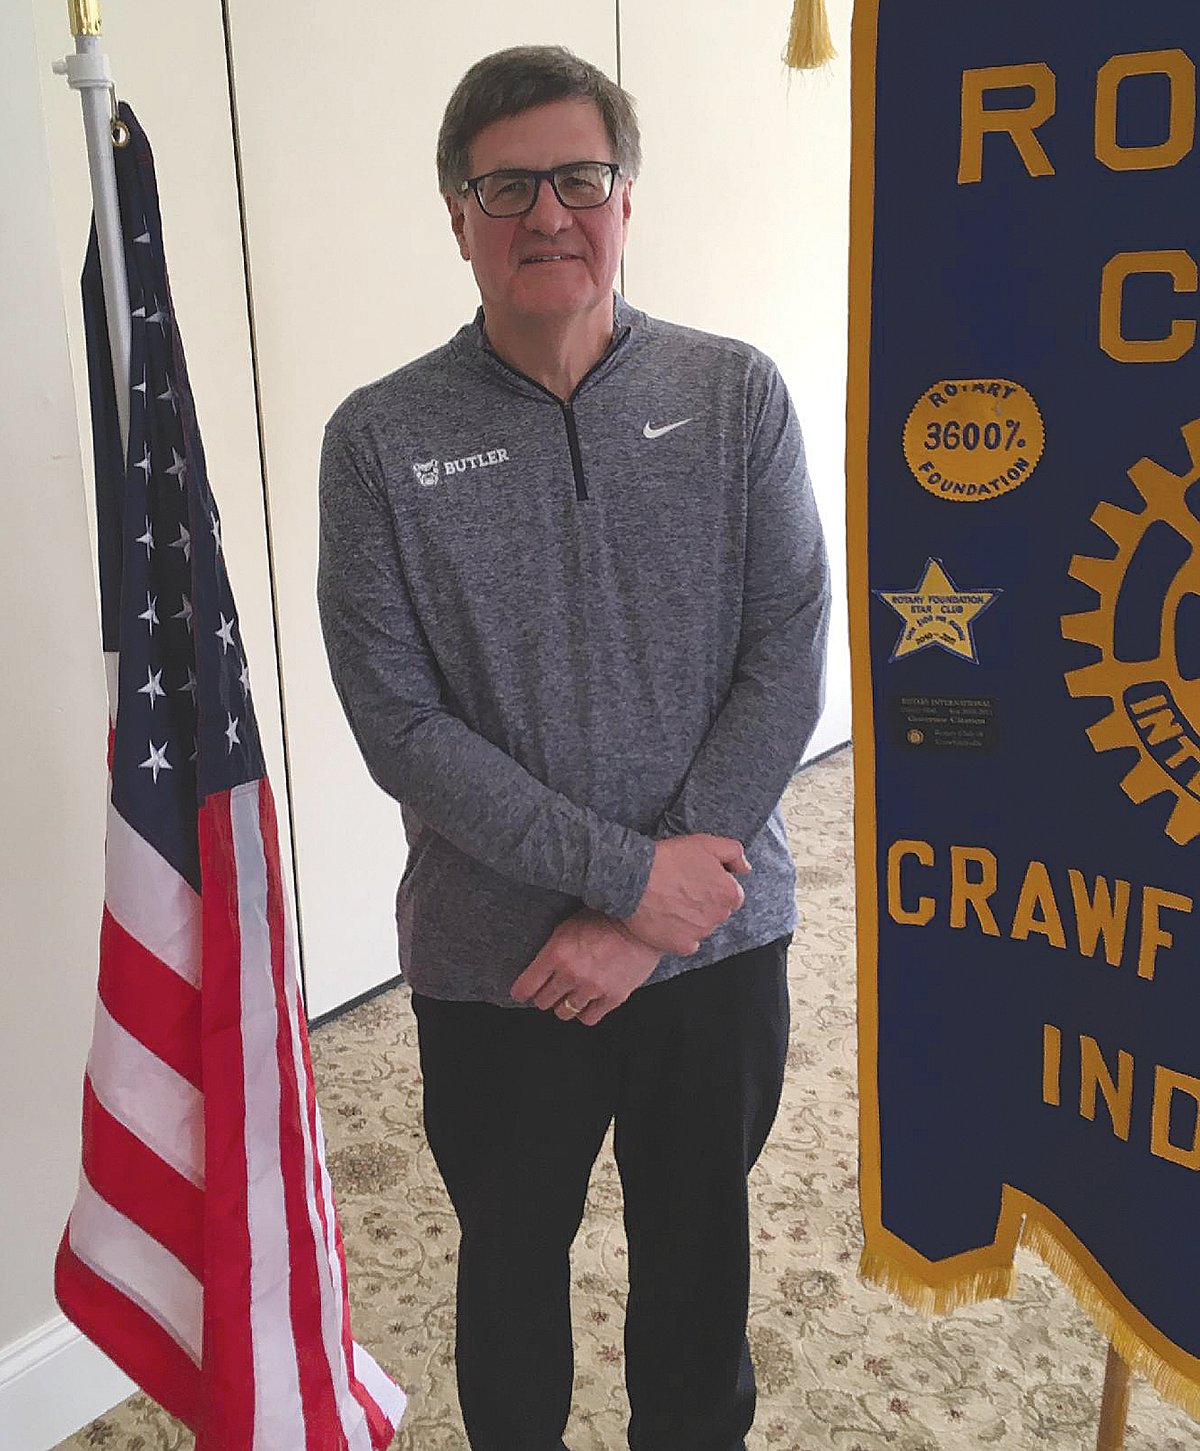 Dave Peach, general manager of the three radio stations in Crawfordsville, spoke to the Crawfordsville Rotary Club at their weekly meeting. Peach is also the public address announcer for the Butler University Men's Basketball games. He started in radio in 1978 and started to work for Butler in 1979 when Tony Hinkle was coaching football, baseball and basketball at the college. He brought a bobble head of Tony Hinkle to show the Rotarians. Peach shared many stories about his time at Butler and shared his wardrobe of shirts he has worn every time he was broadcasting. In 1884, WabashCollege played its first football game with Butler. (No, he didn't announce that game.) On Sept. 15 you can hear Peach announcing the Wabash vs. Butler Football Game from Butler. When Peach is at the radio stations in Crawfordsville he tries to present local activities and sports for his listeners. "Always Be Ready" is his motto.